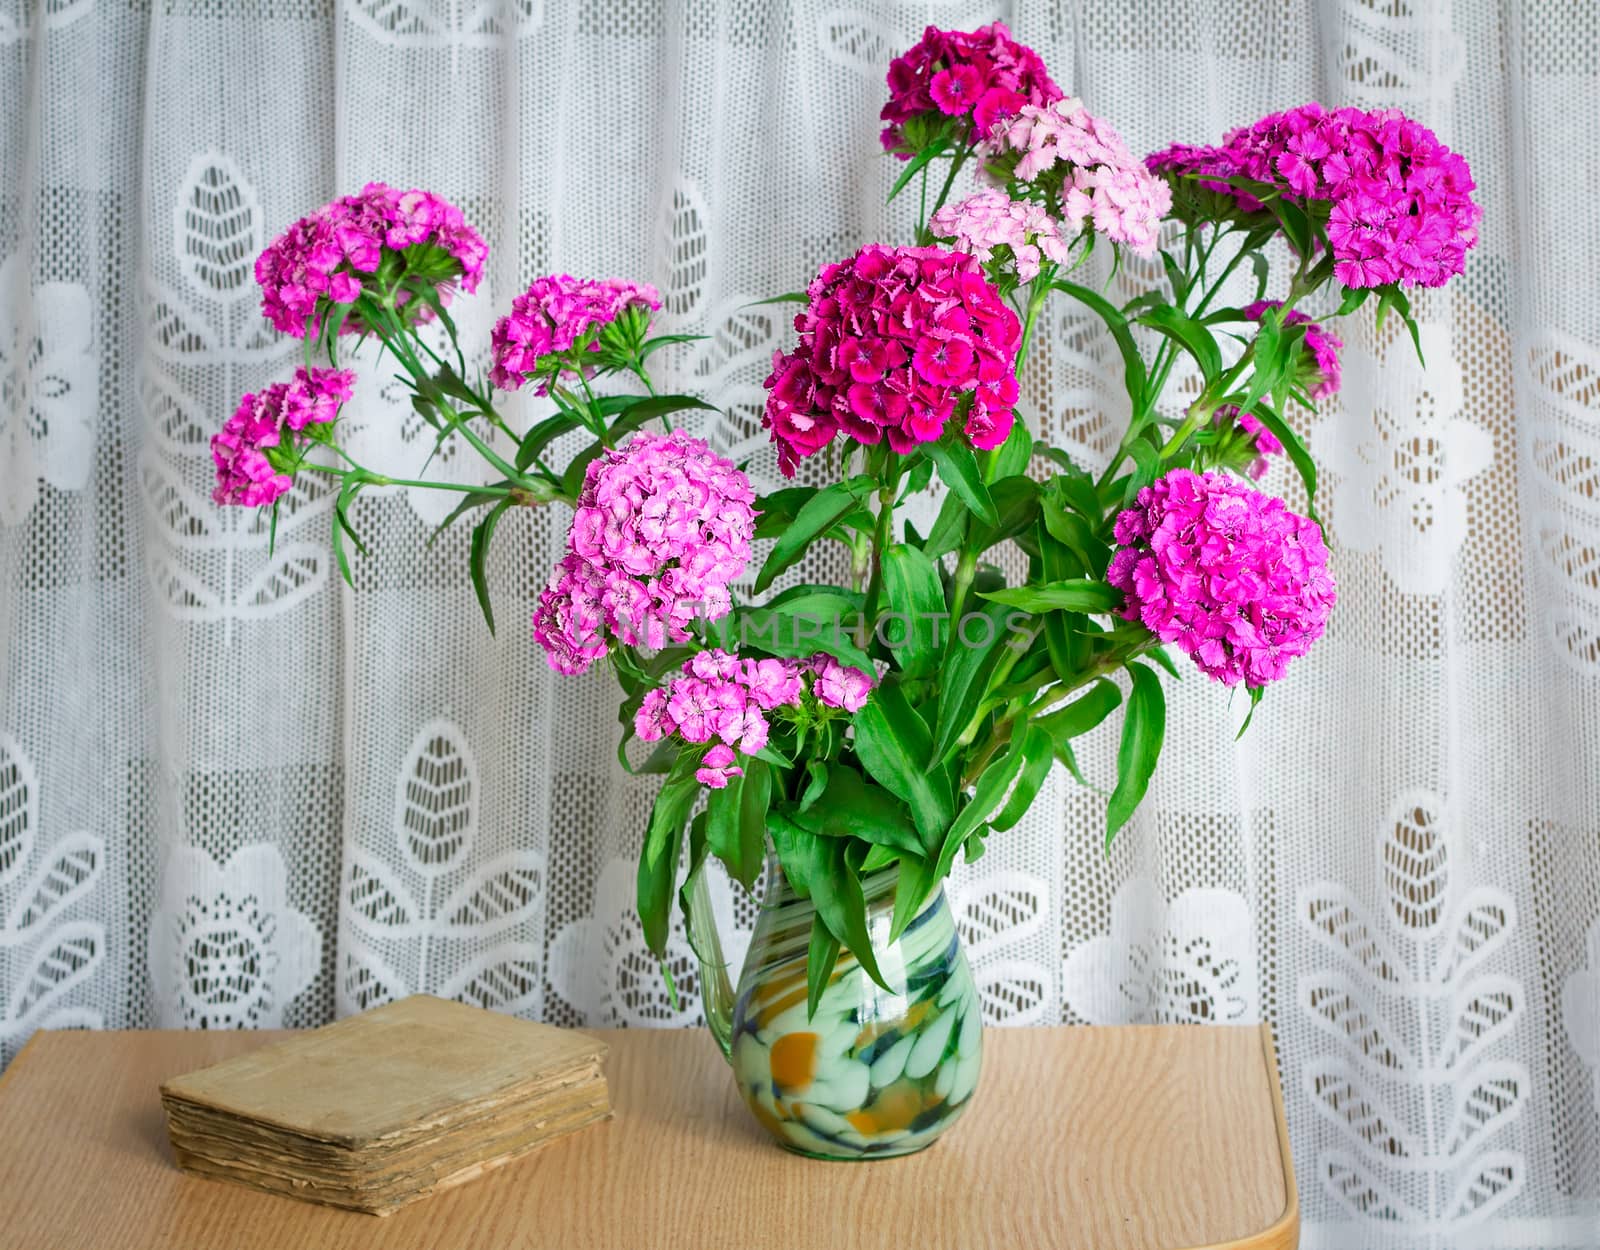 A bouquet of flowers carnations on the table in a glass vase. by georgina198